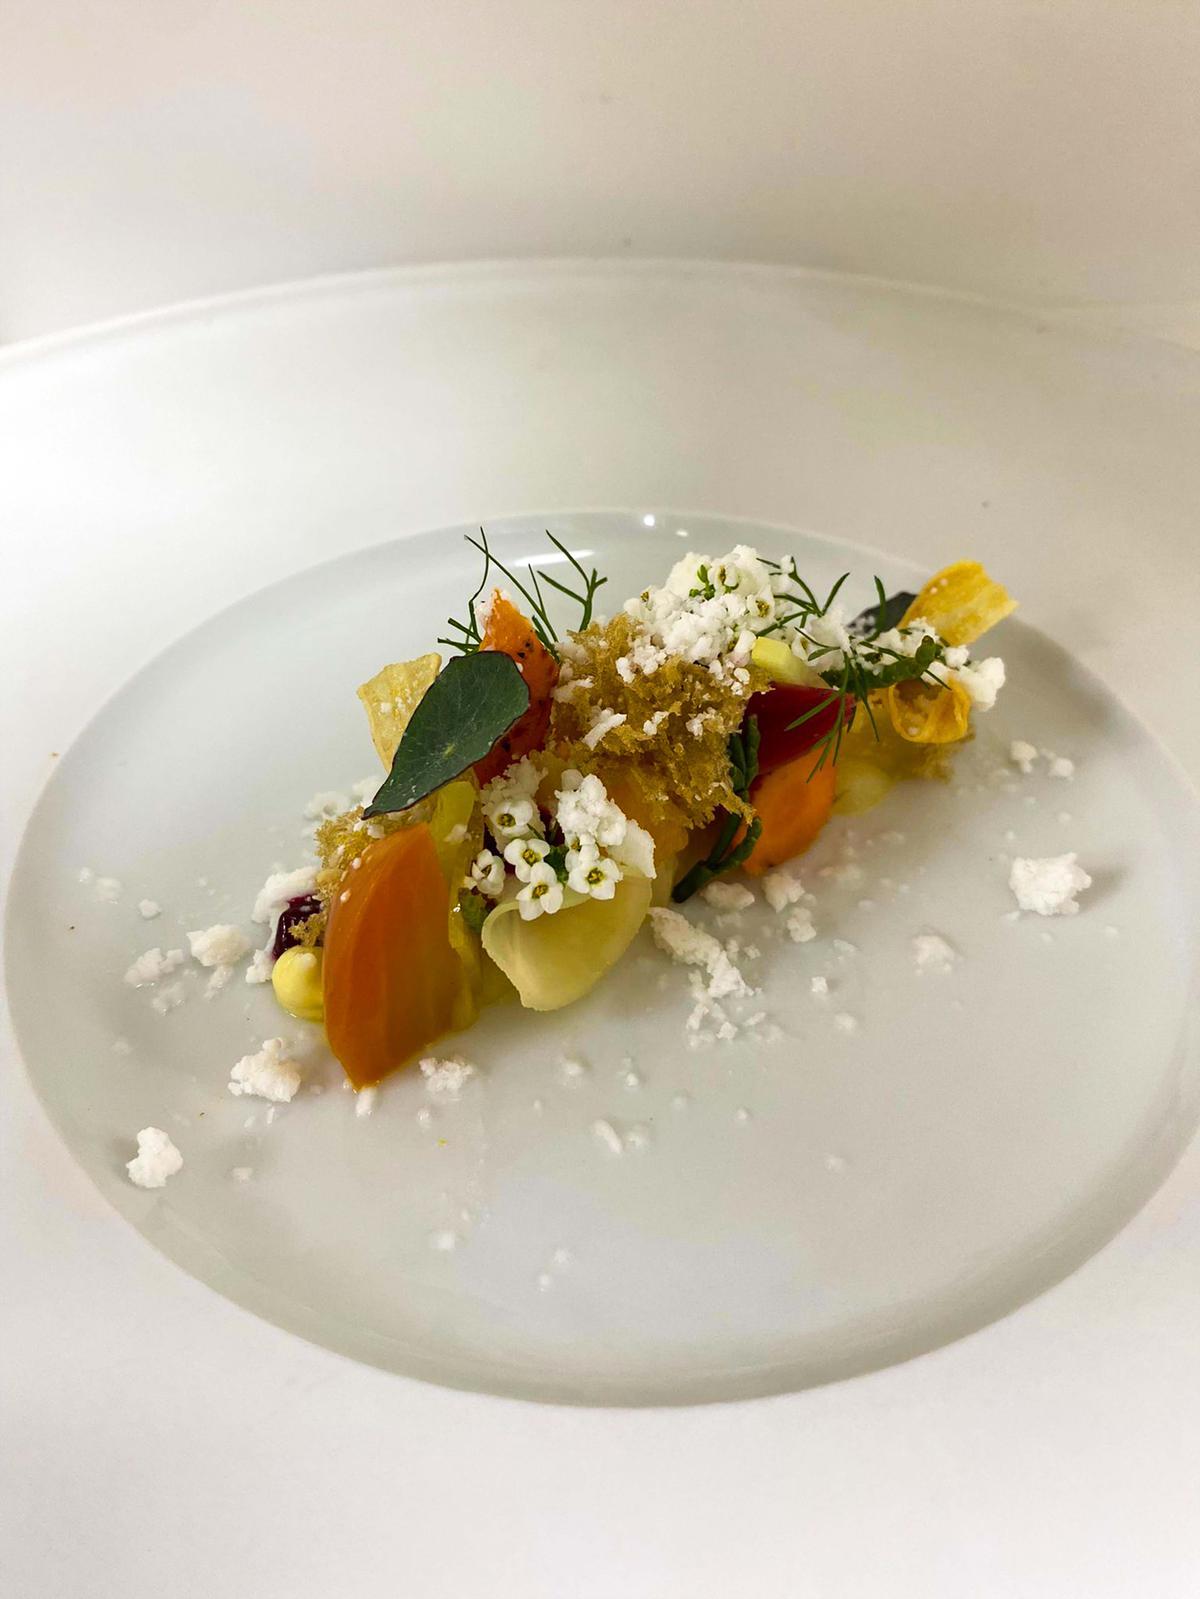 Roots salad with pear, citrus and horseradish by chef Denis Lucchi 